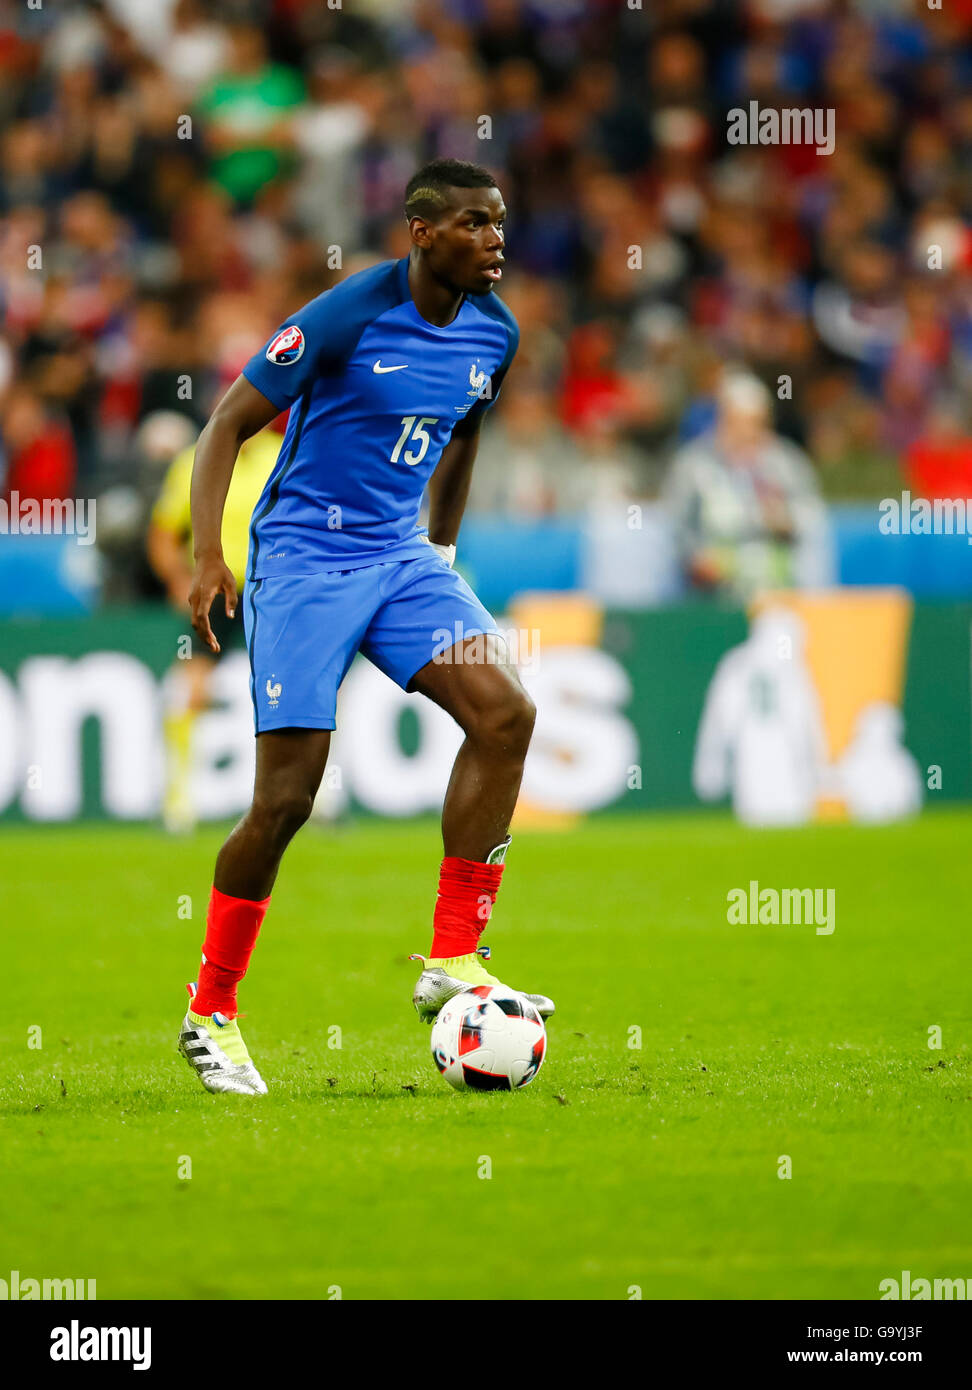 Paris, France. 3rd July, 2016. Paul POGBA, FRA 15 drives the ball, action,  full-size, FRANCE - ICELAND 5-2 Quarterfinal ,Football European  Championships EURO at 03 rd of July, 2016 in Paris, Stade